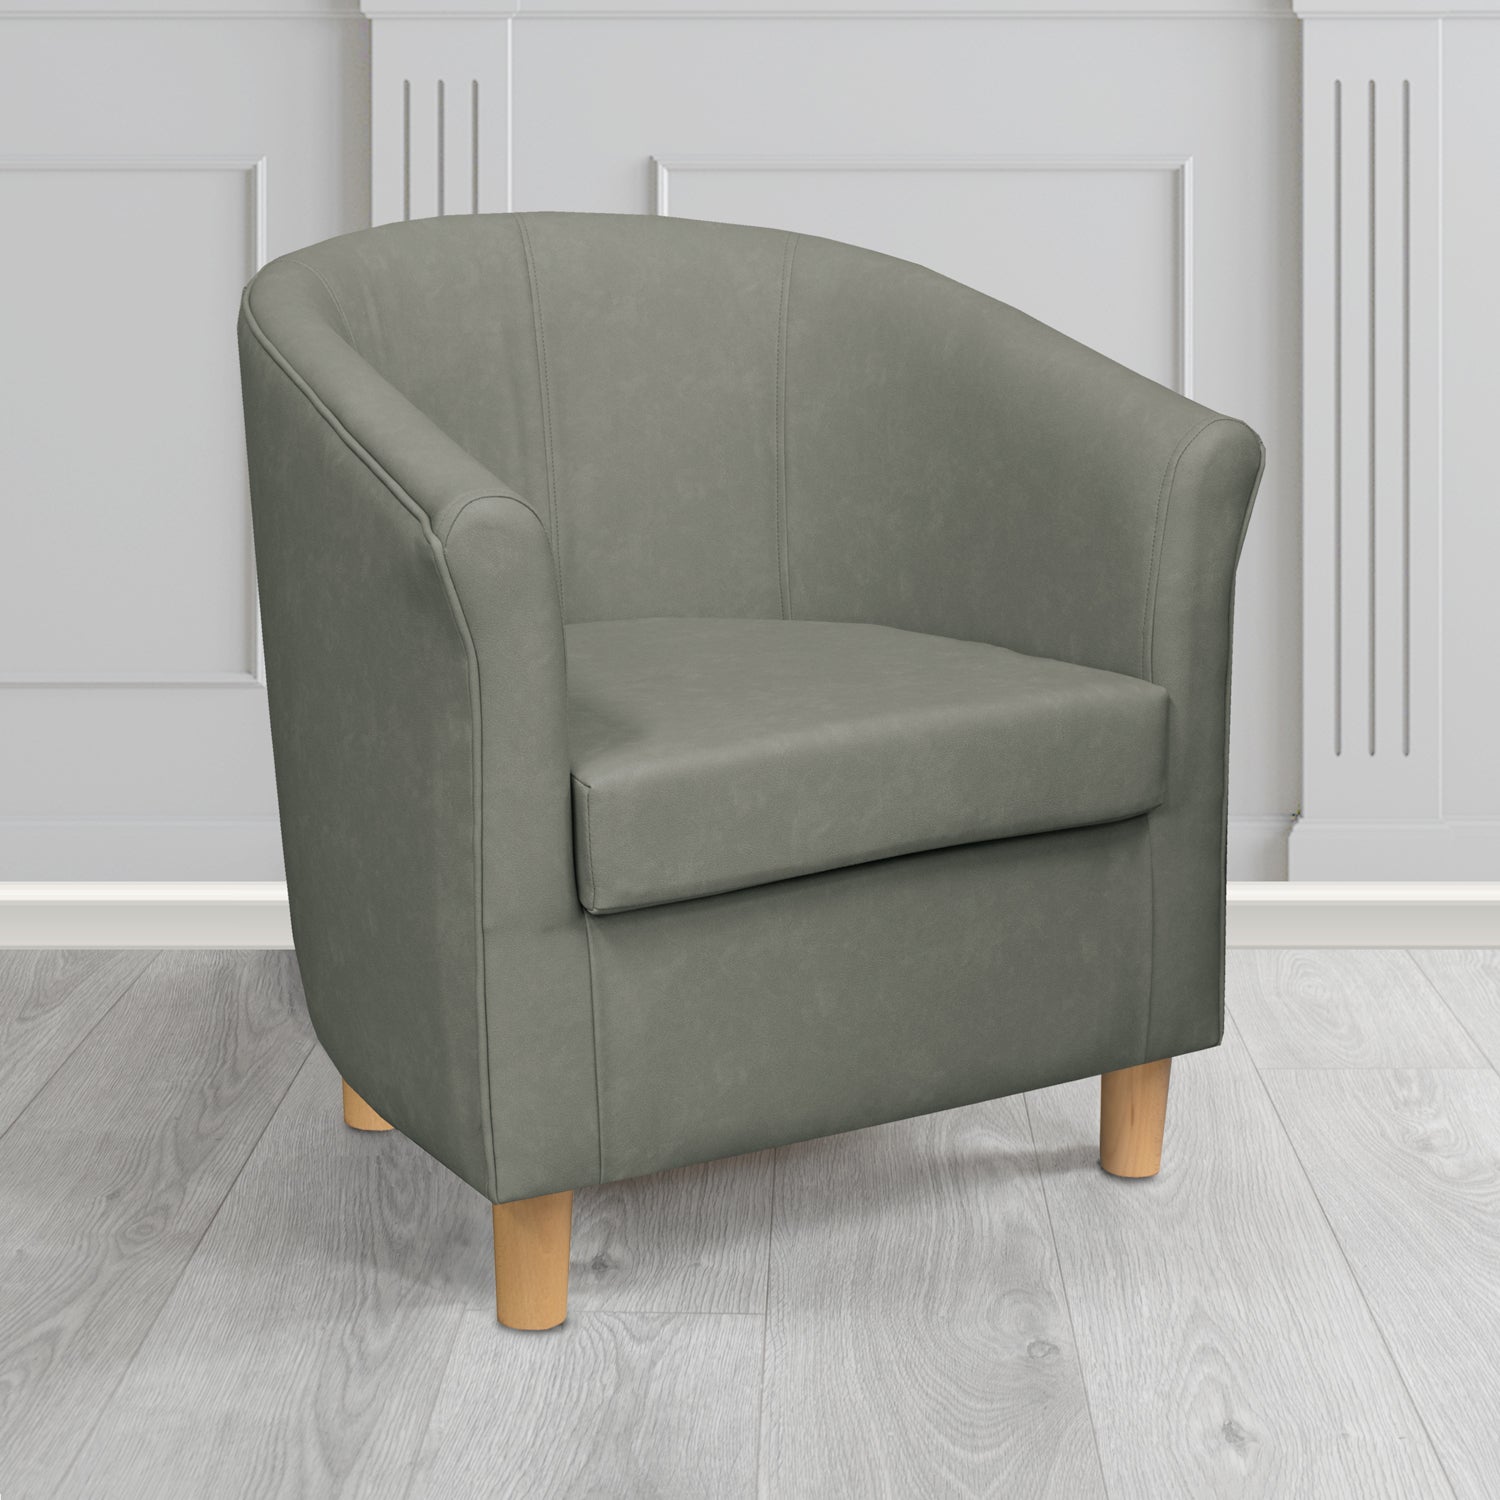 Tuscany Tub Chair in Infiniti Elephant INF1860 Antimicrobial Crib 5 Faux Leather - The Tub Chair Shop